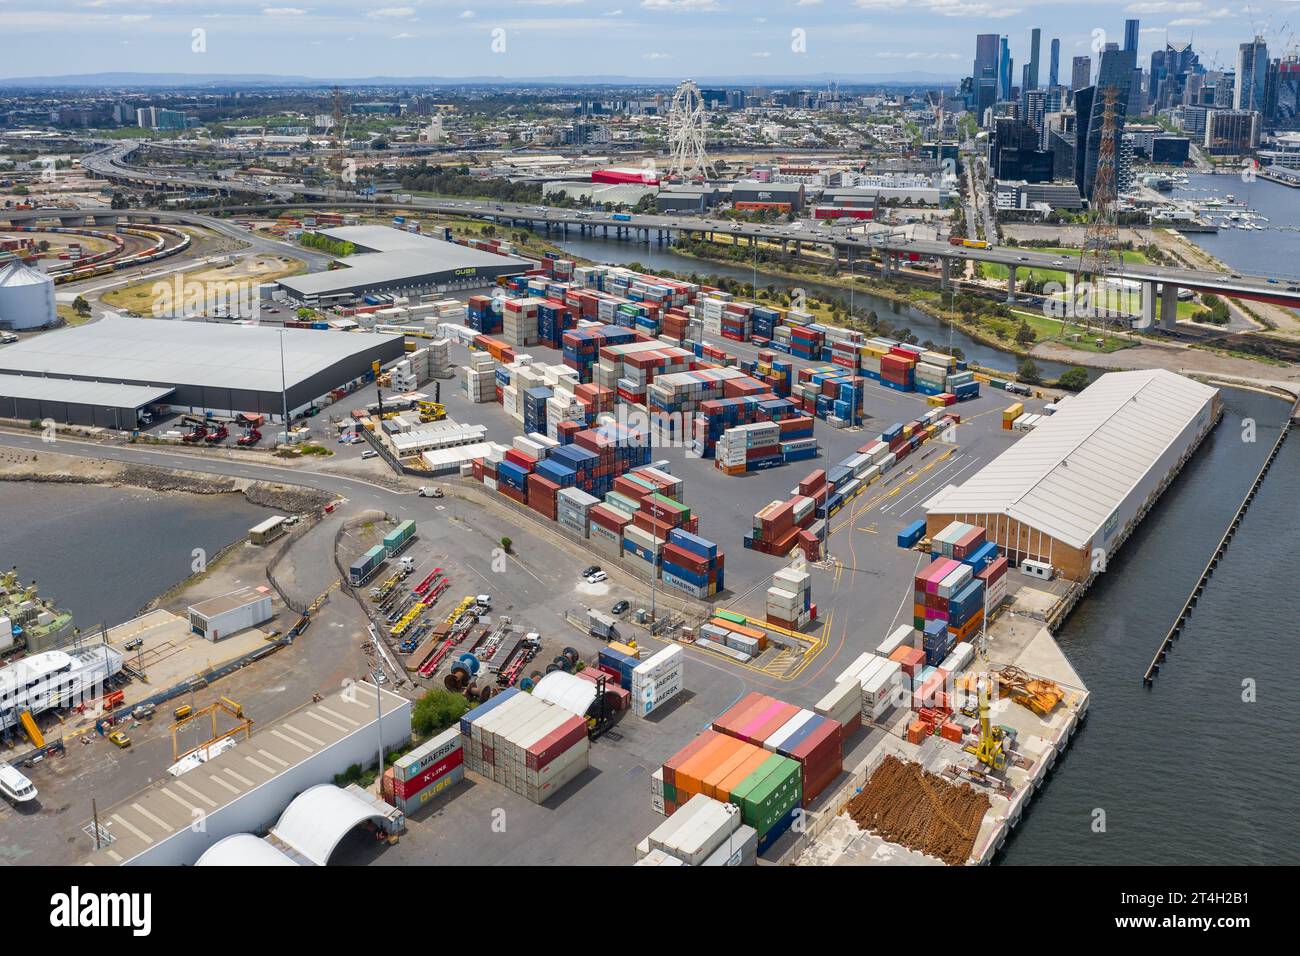 Aerial view of containers stacked at a warehouse at Docklands in Melbourne, Victoria, Australia Stock Photo